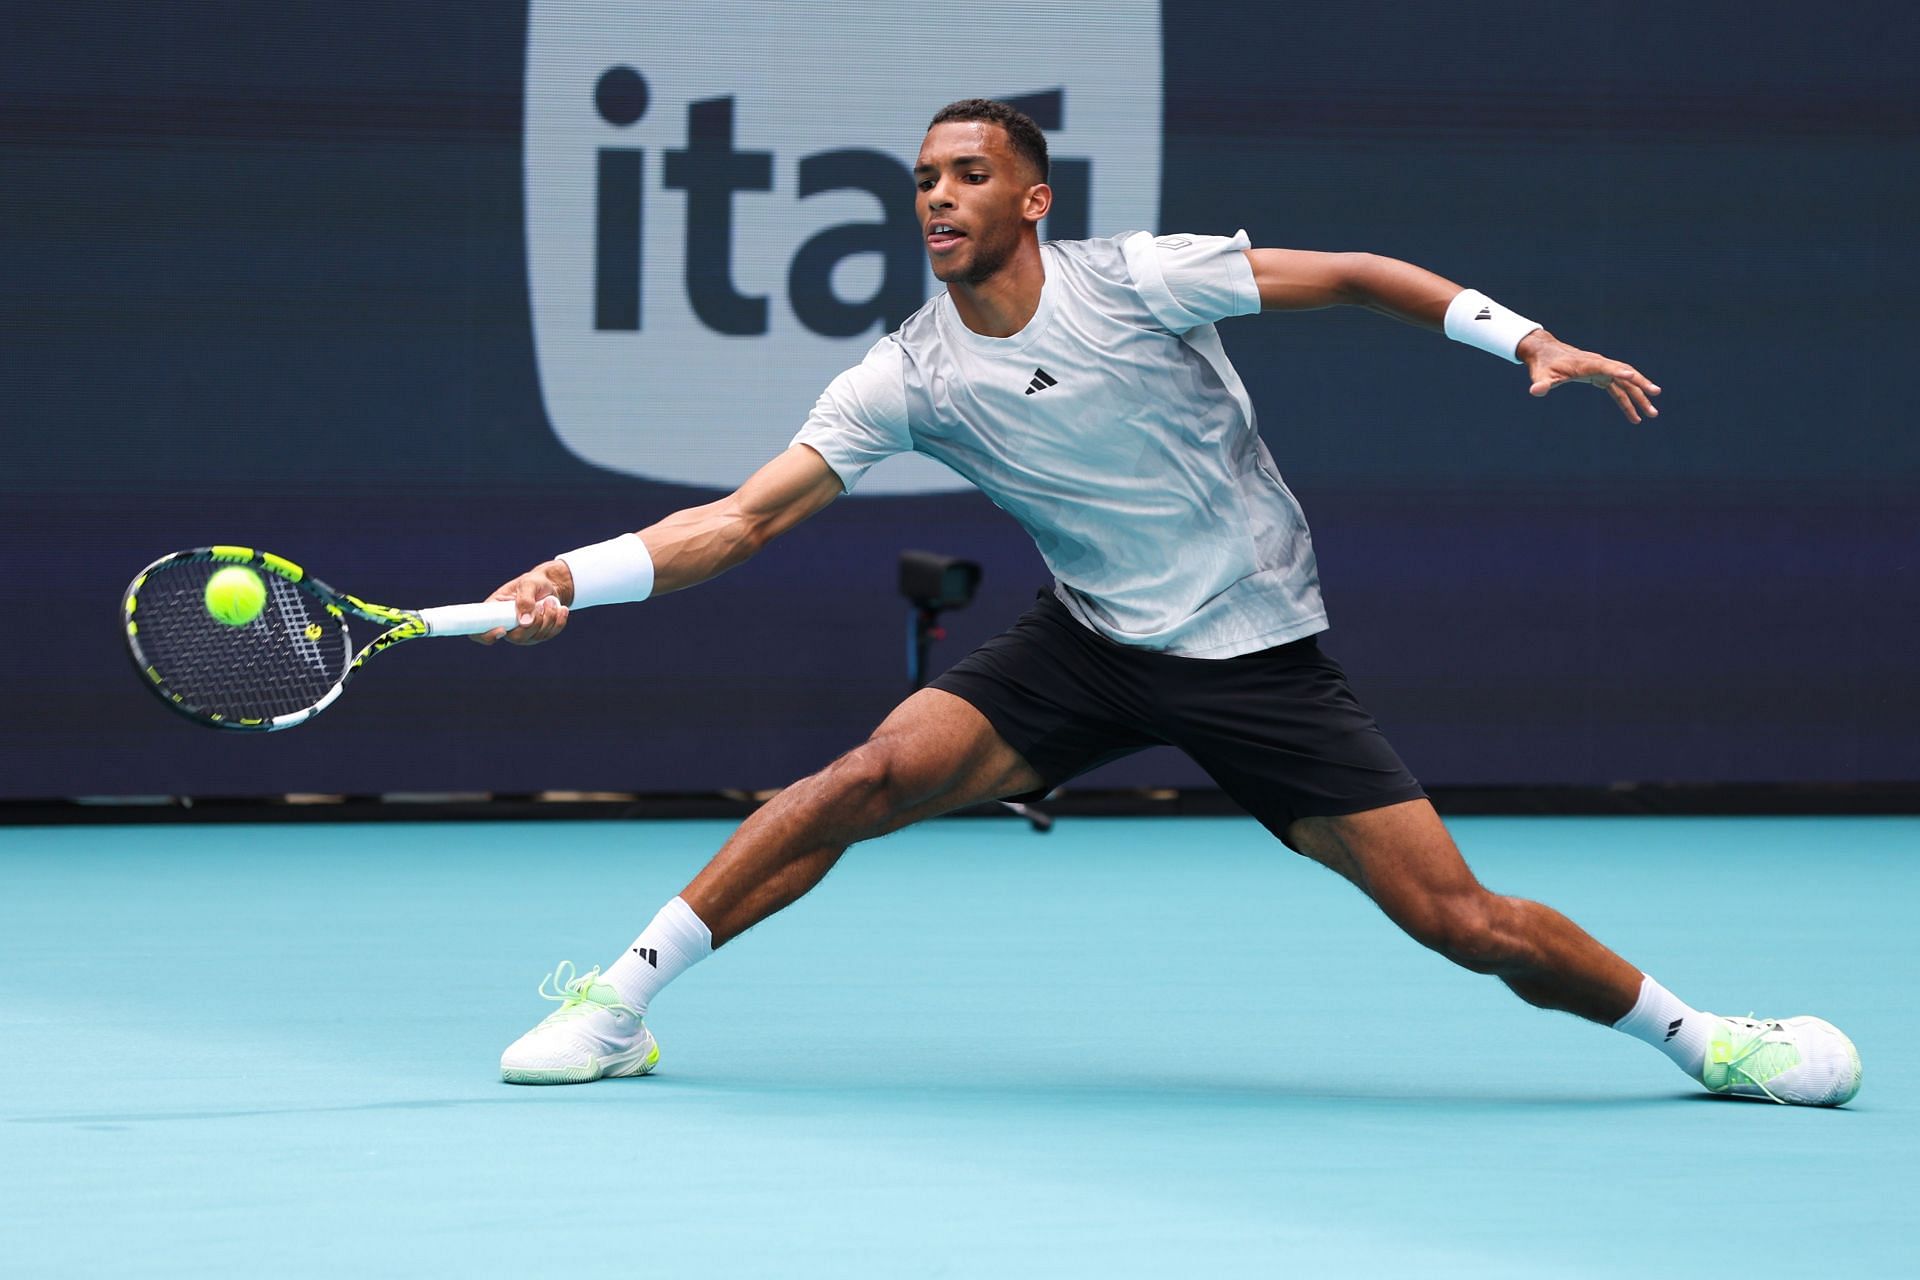 Felix Auger-Aliassime in action at the Miami Open